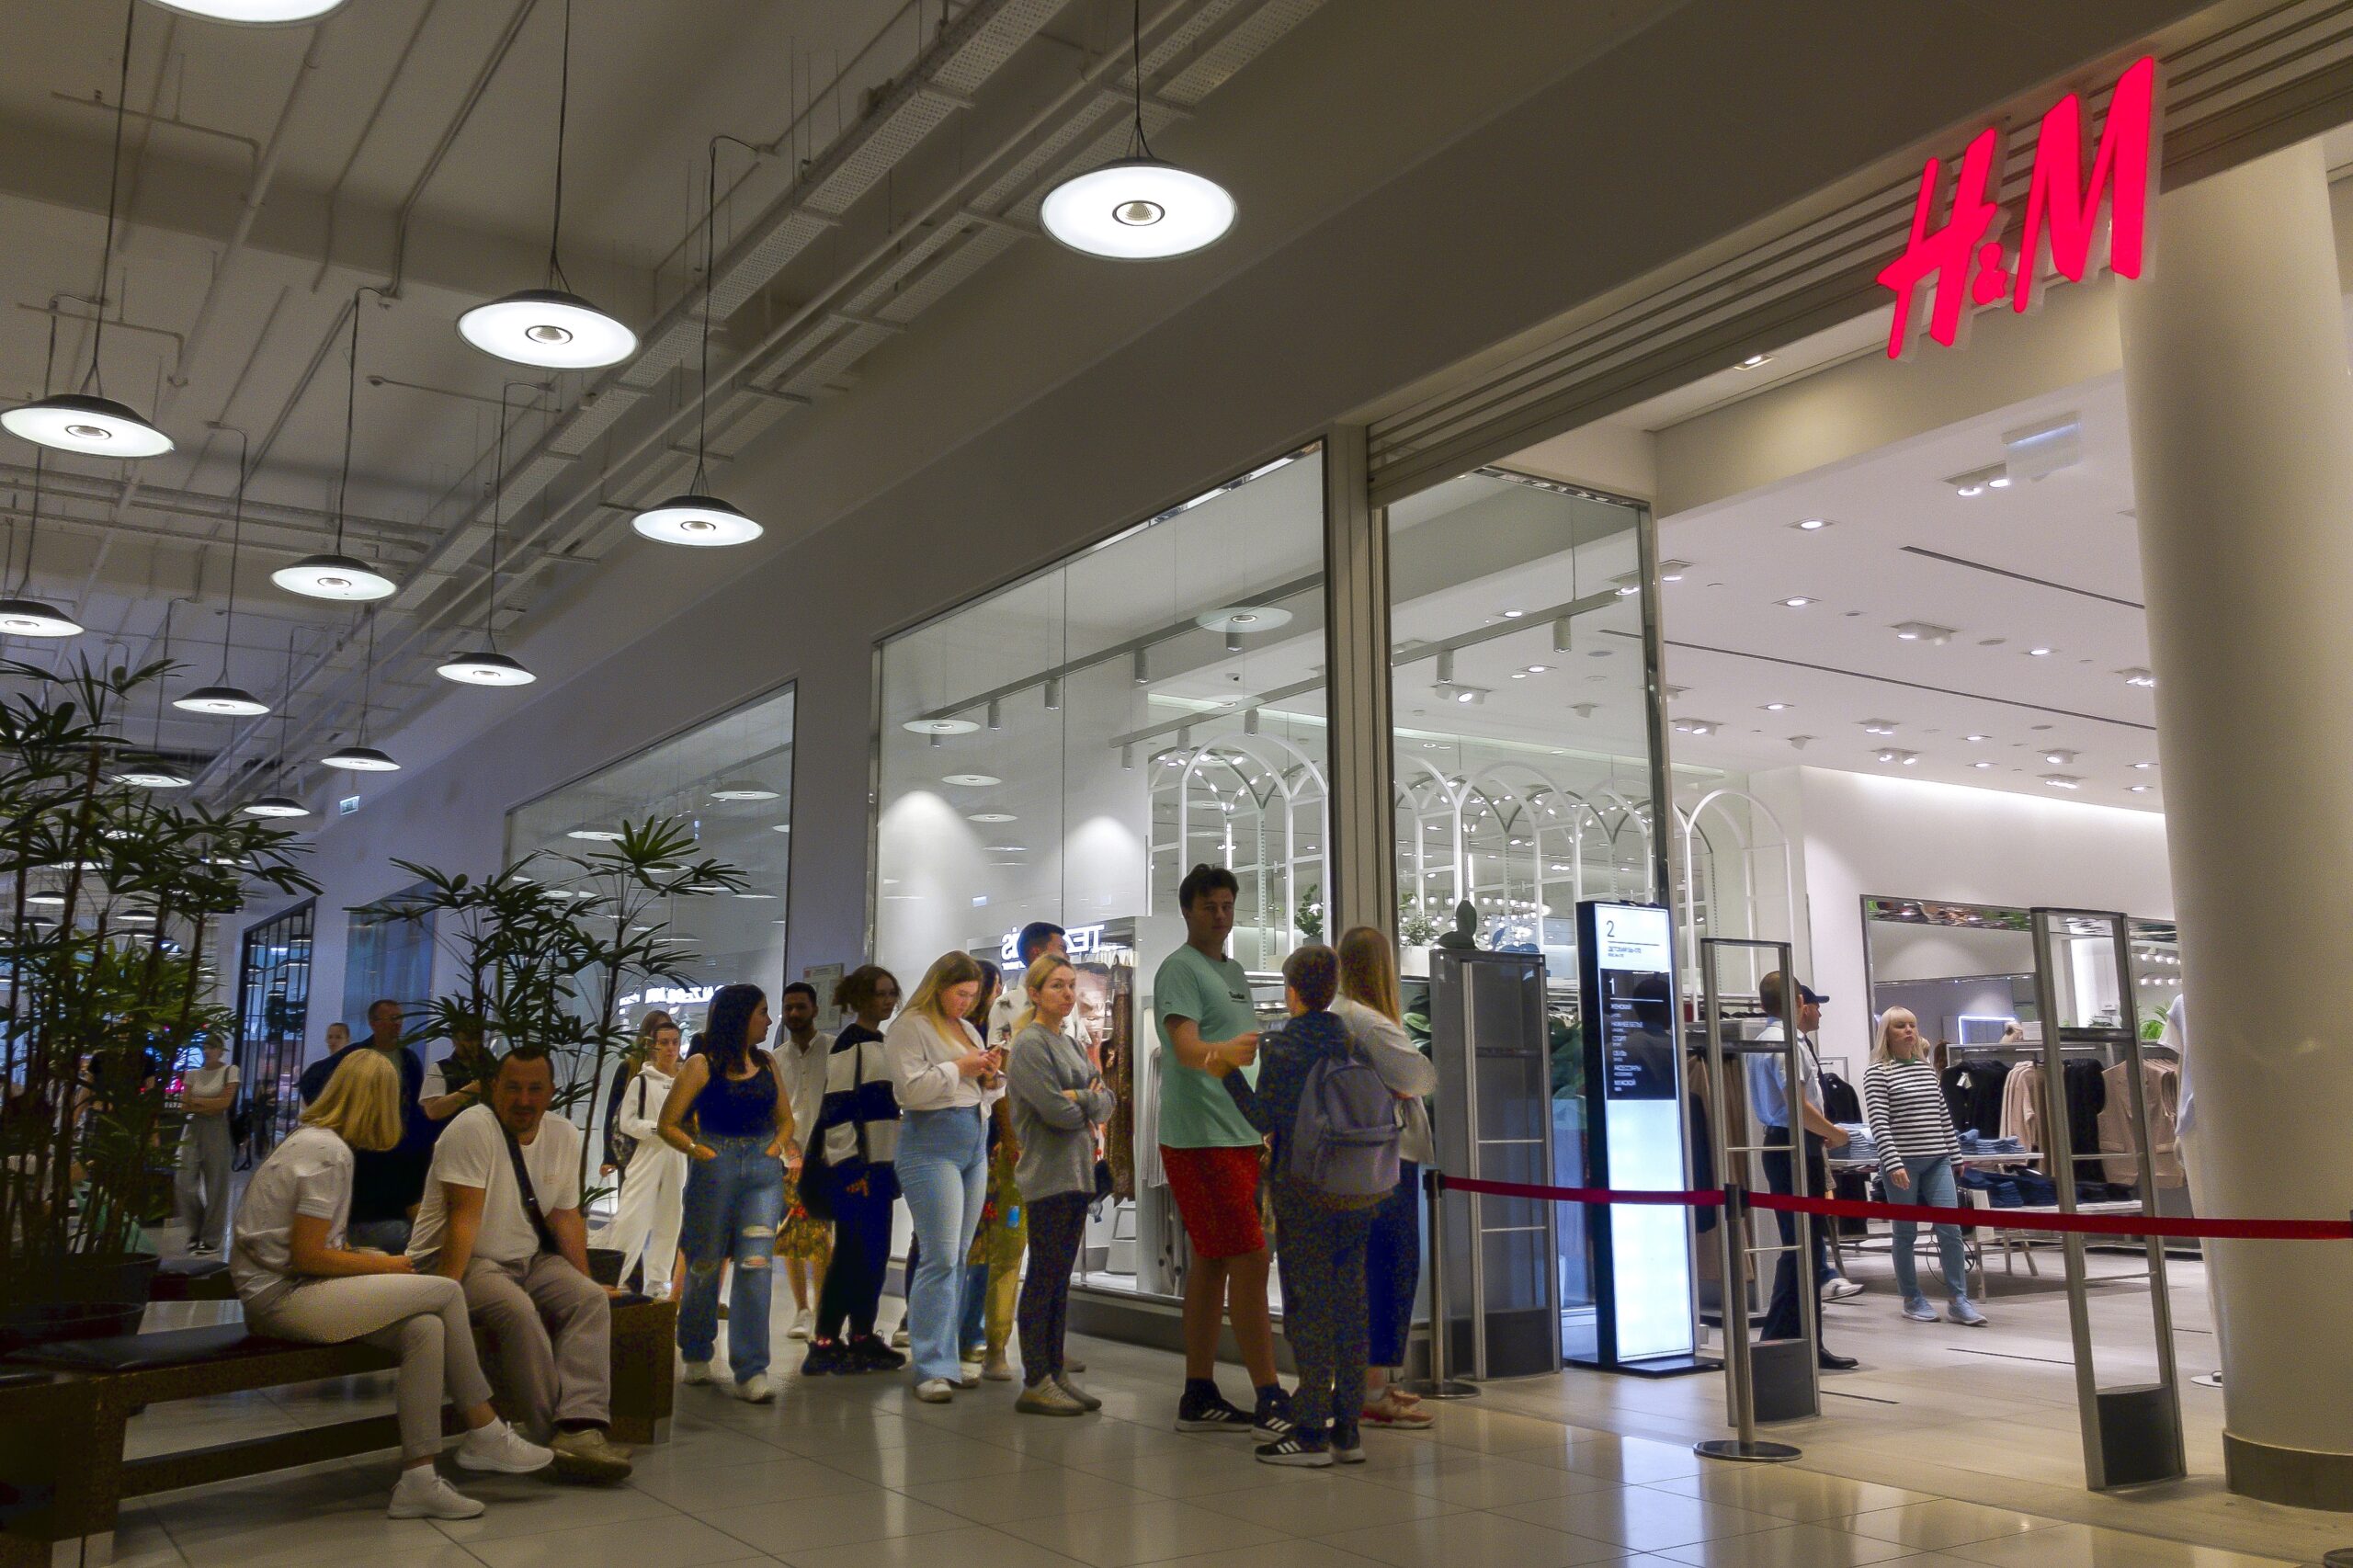 People line up to enter an H&M shop and buy items on sale in the Aviapark shopping mall in Moscow, Russia, Tuesday, Aug. 9, 2022. Russians are snapping up Western fashion and furniture this week as H&M and IKEA sell off the last of their inventory in Russia, moving forward with their exit from the country after it sent troops into Ukraine. Sweden-based H&M and Netherlands-based IKEA had paused sales in Russia after the military operation began and are now looking to unload their stocks of clothing and furnishings as they wind down operations there. (AP Photo/Alexander Zemlianichenko)